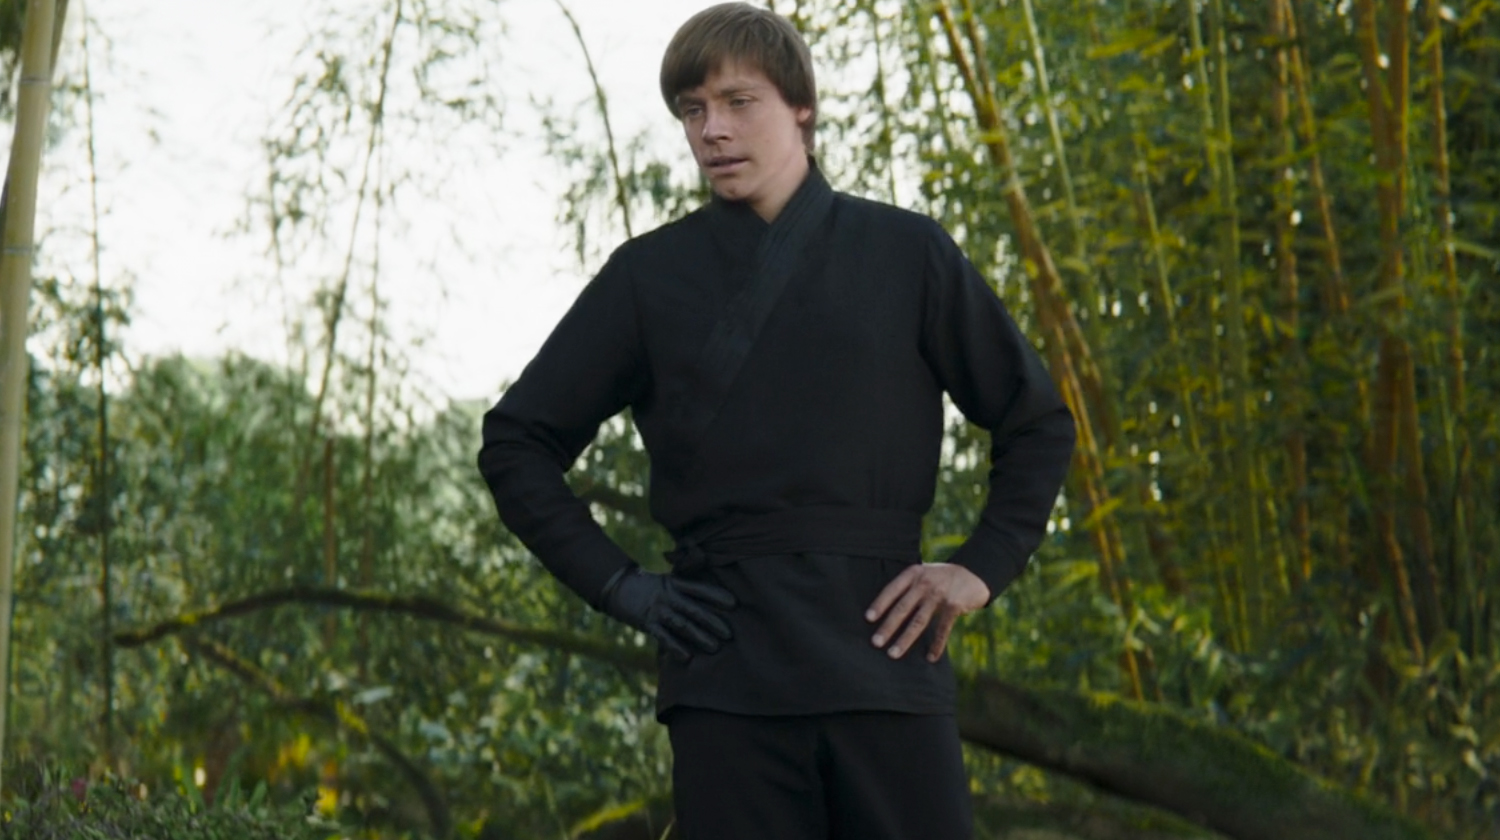 Yes, it's great to see Luke training Grogu. And yes, "Star Wars" has a Skywalker nostalgia fixation